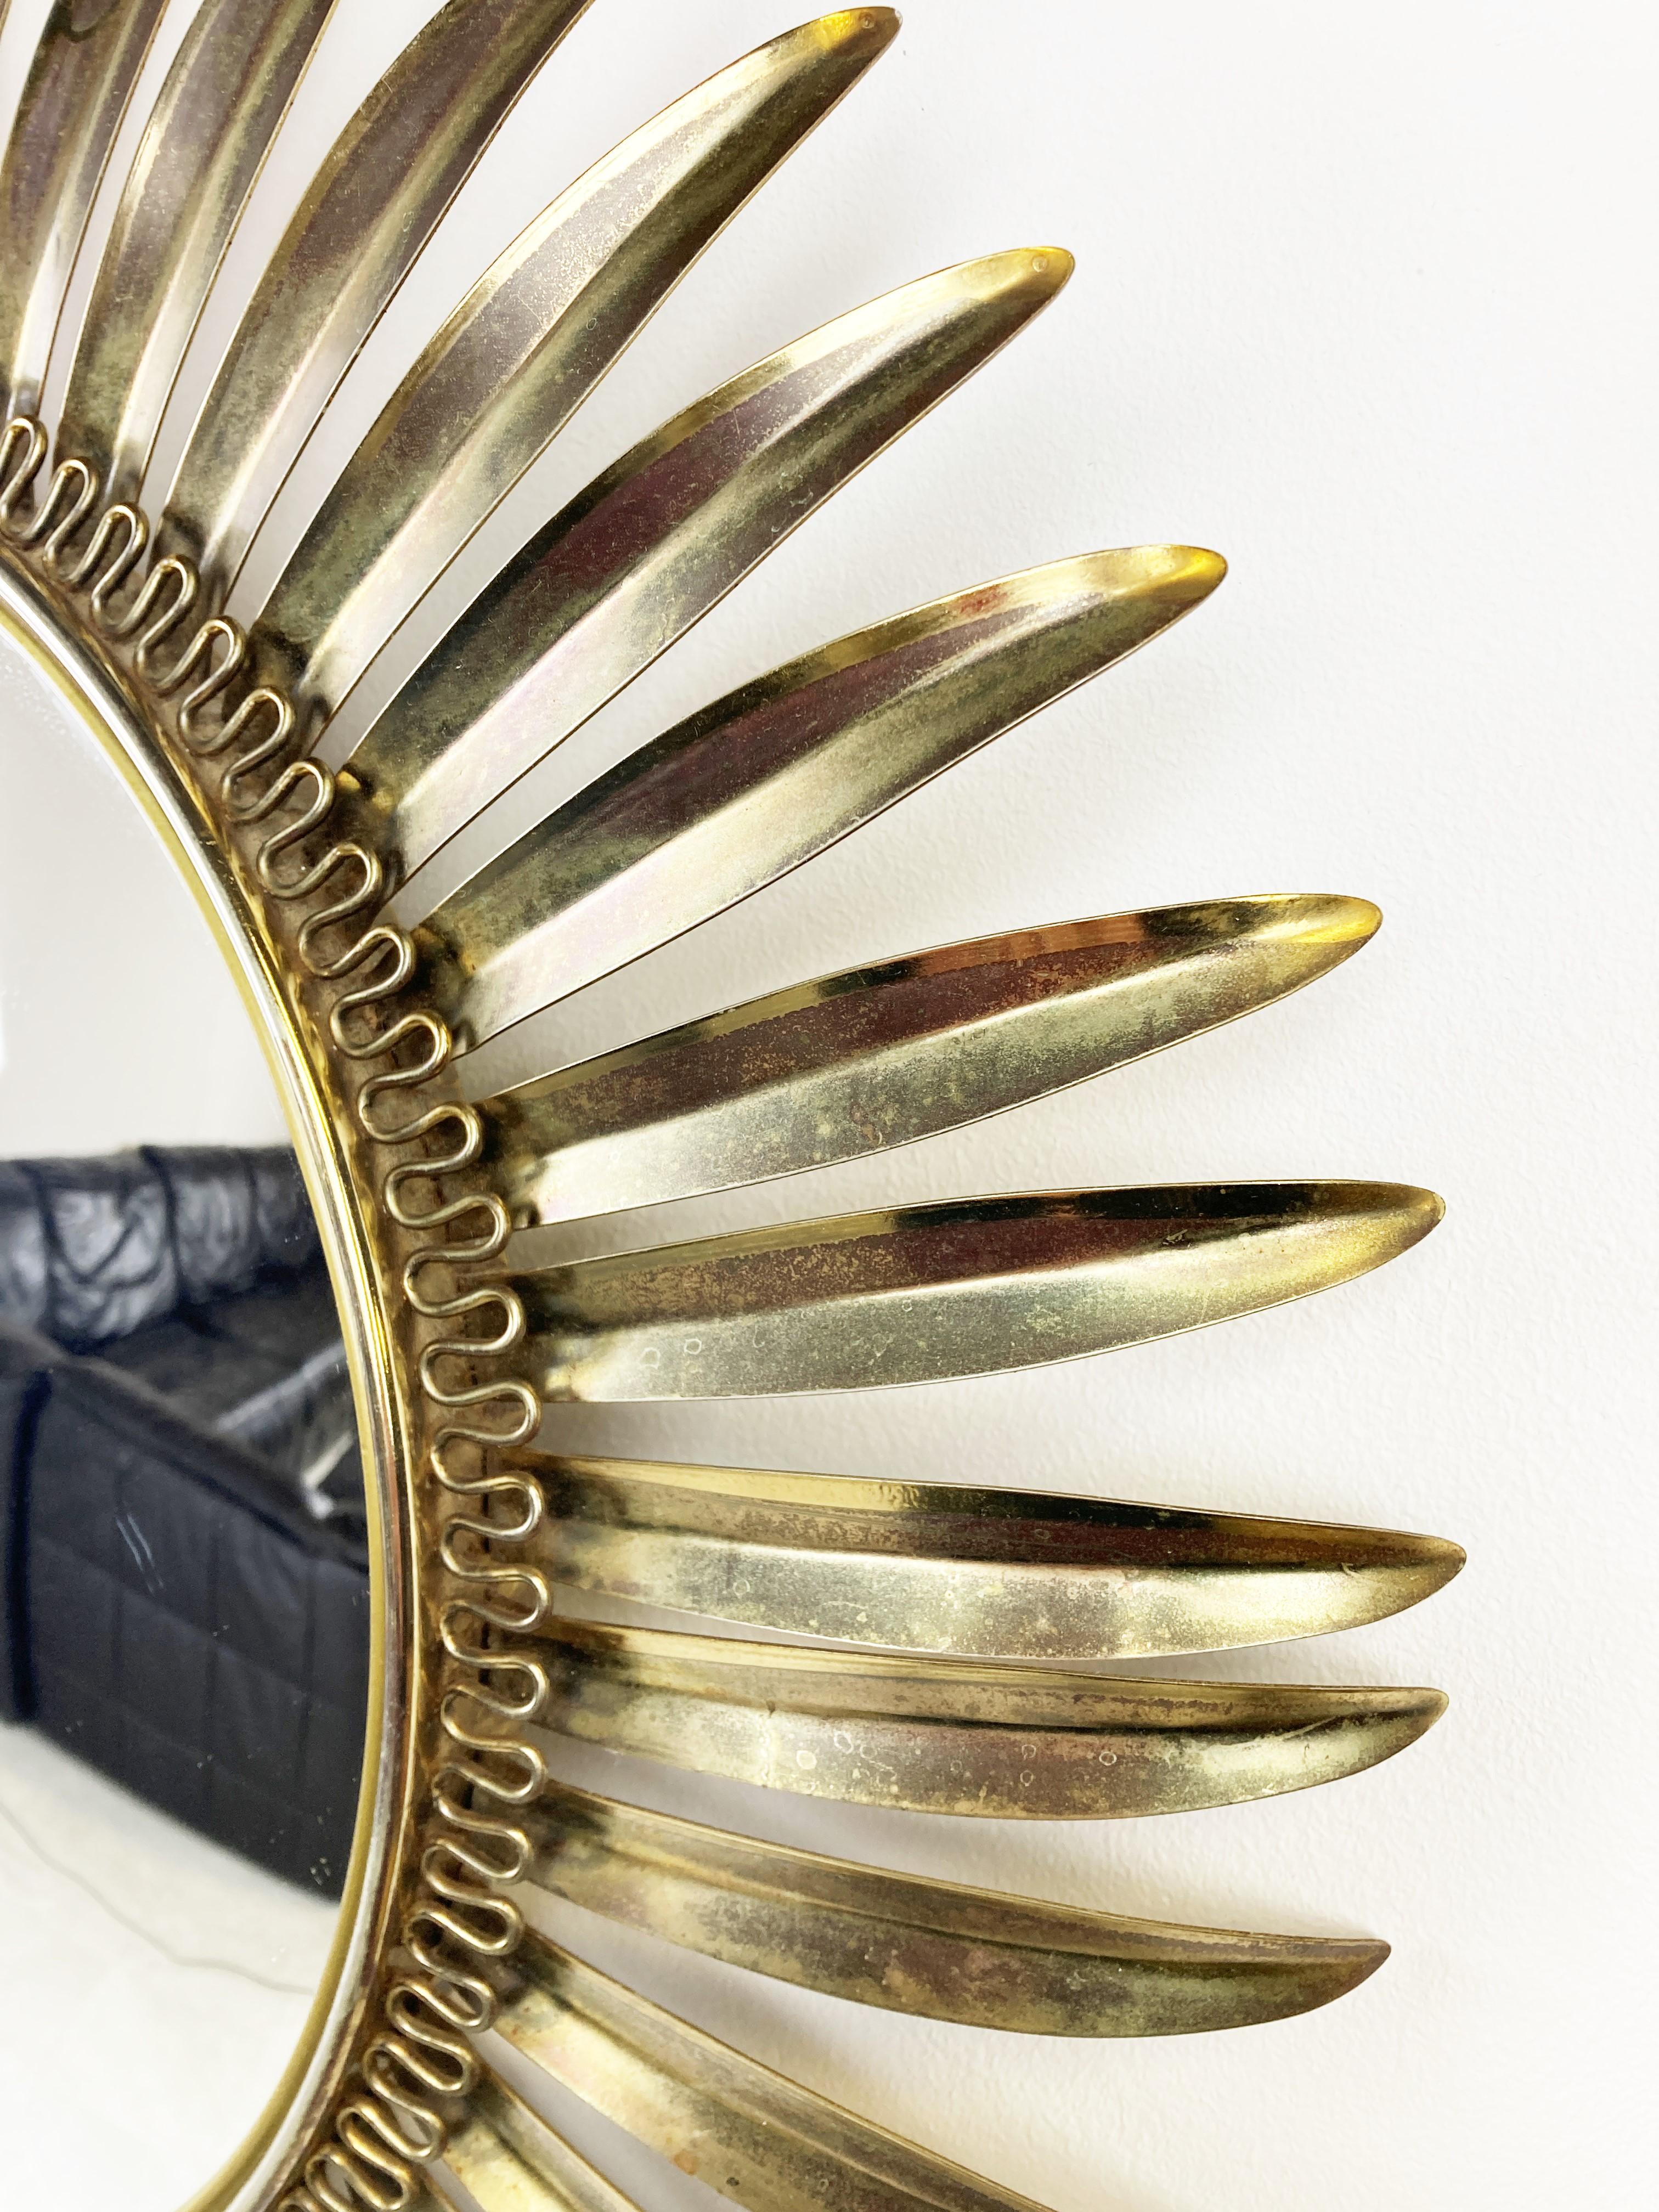 Midcentury brass sunburst or flower mirror with convex glass.

This mirror fits in most interiors and is a perfect add-on for a regency style interior.

The mirror is made from brass.

Good condition.

France - 1970s

Diameter: